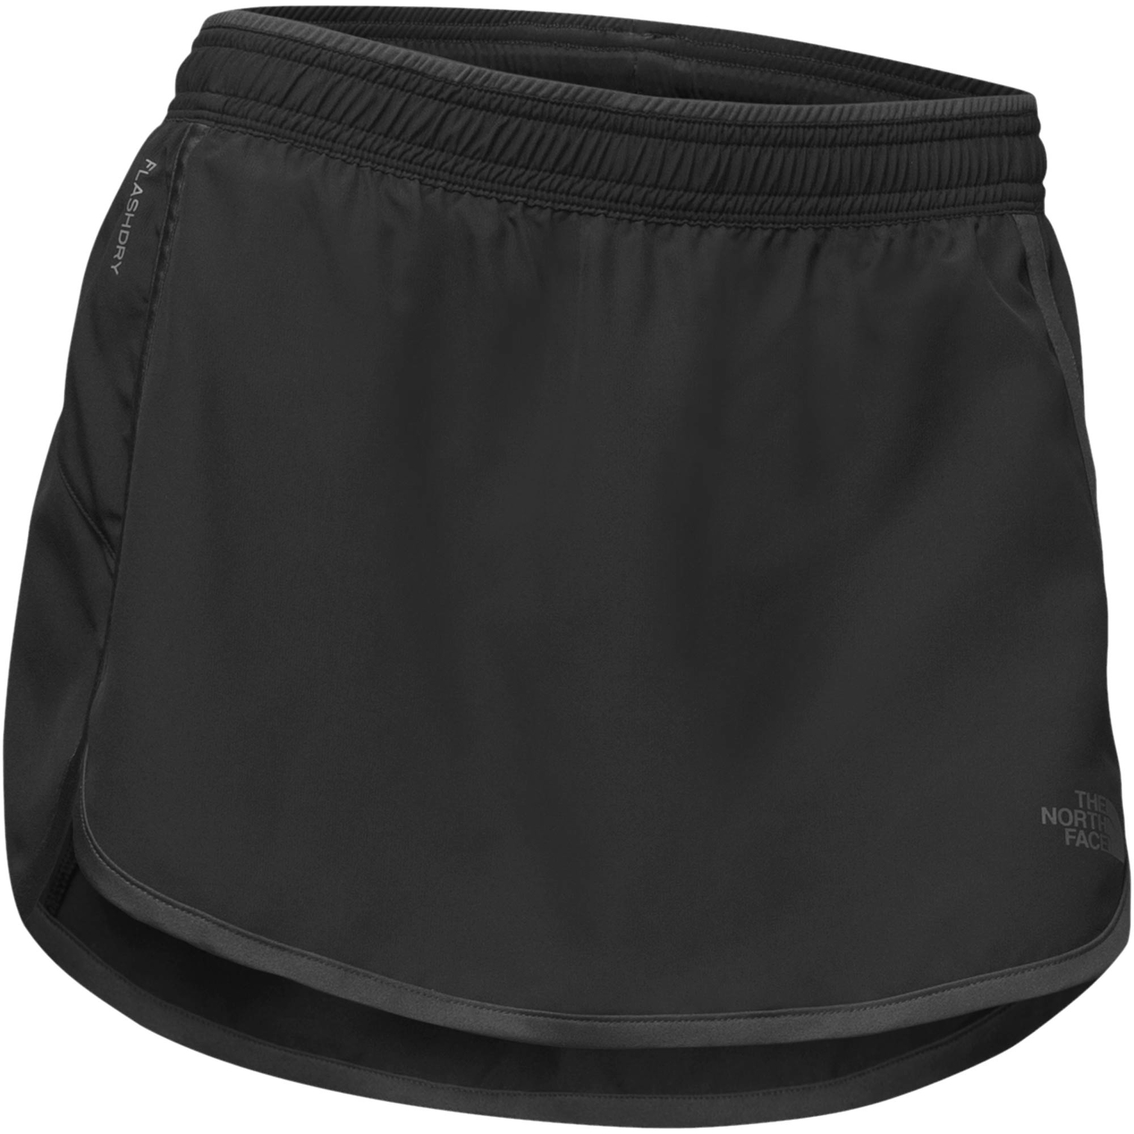 The North Face Reflex Core Skort | Skirts | Clothing & Accessories ...